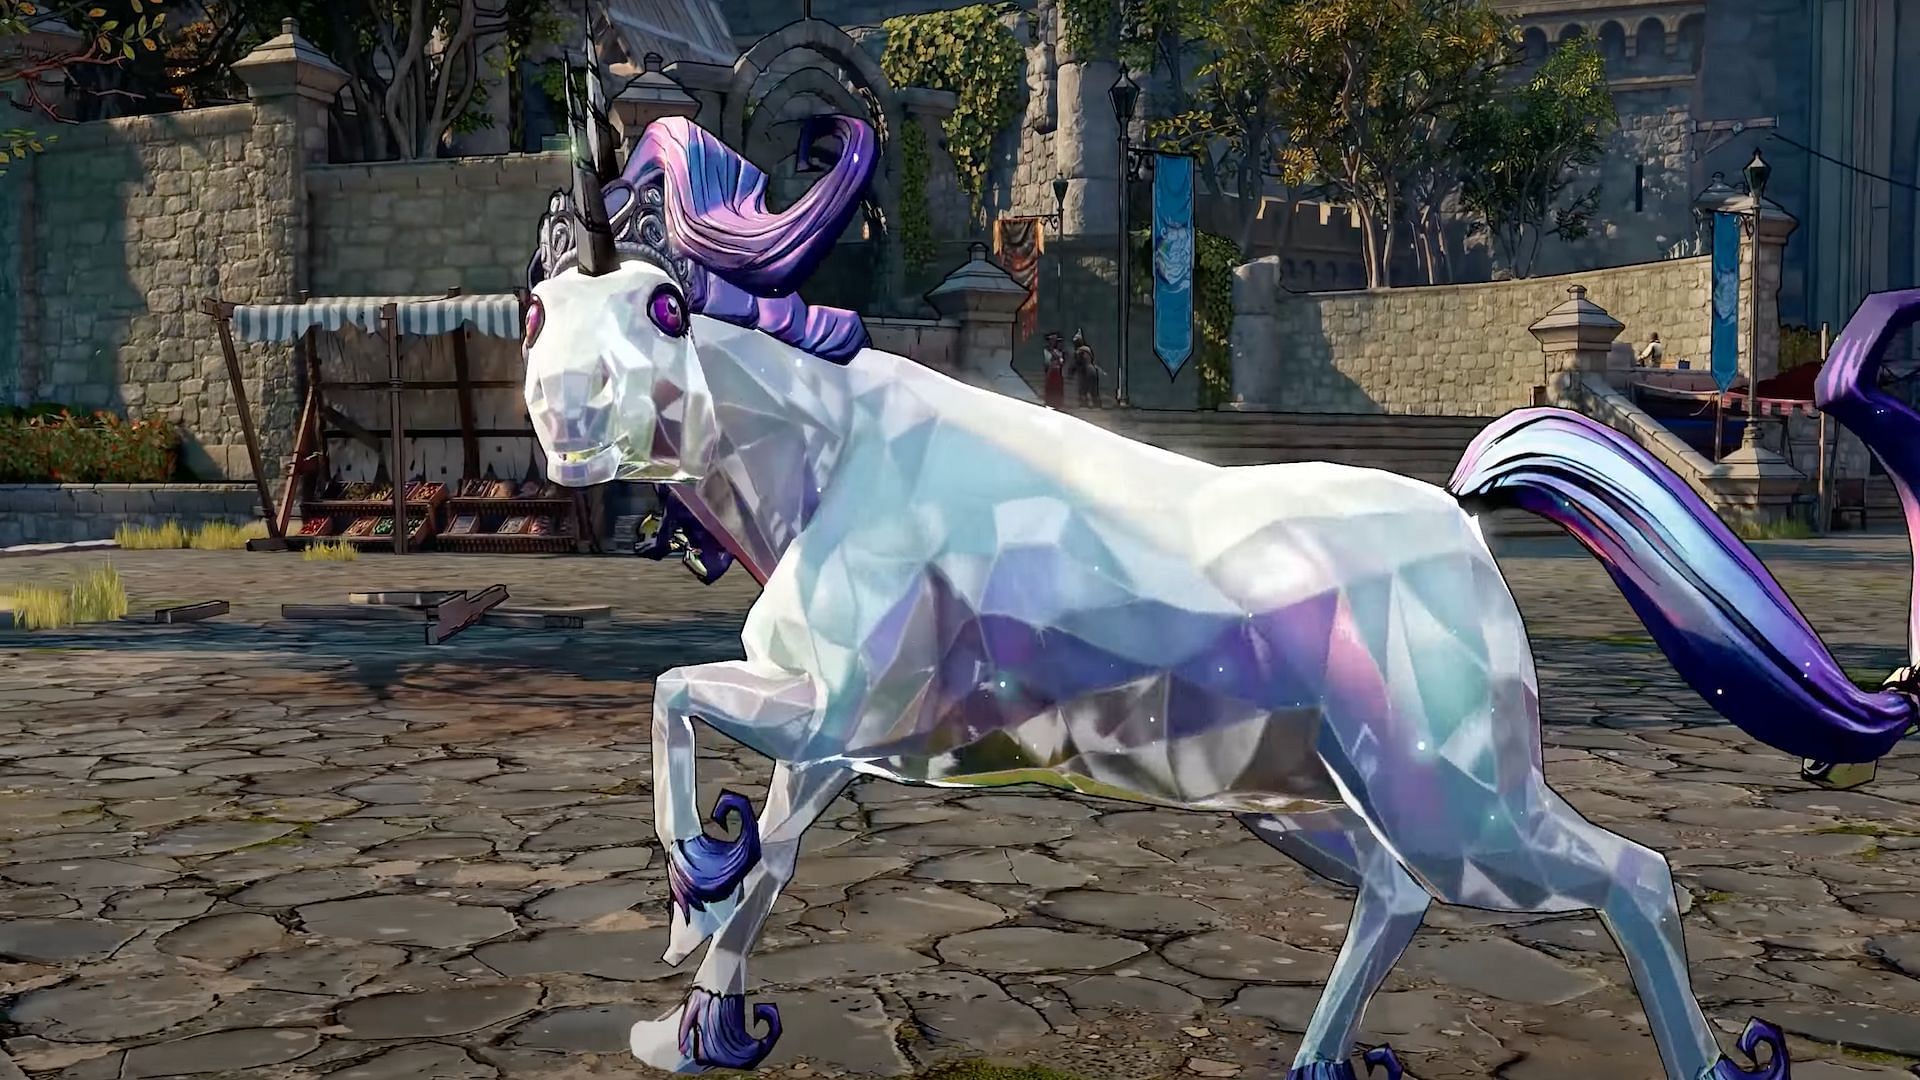 Butt Stallion makes her triumphant return as the Queen (Image via Gearbox Software)